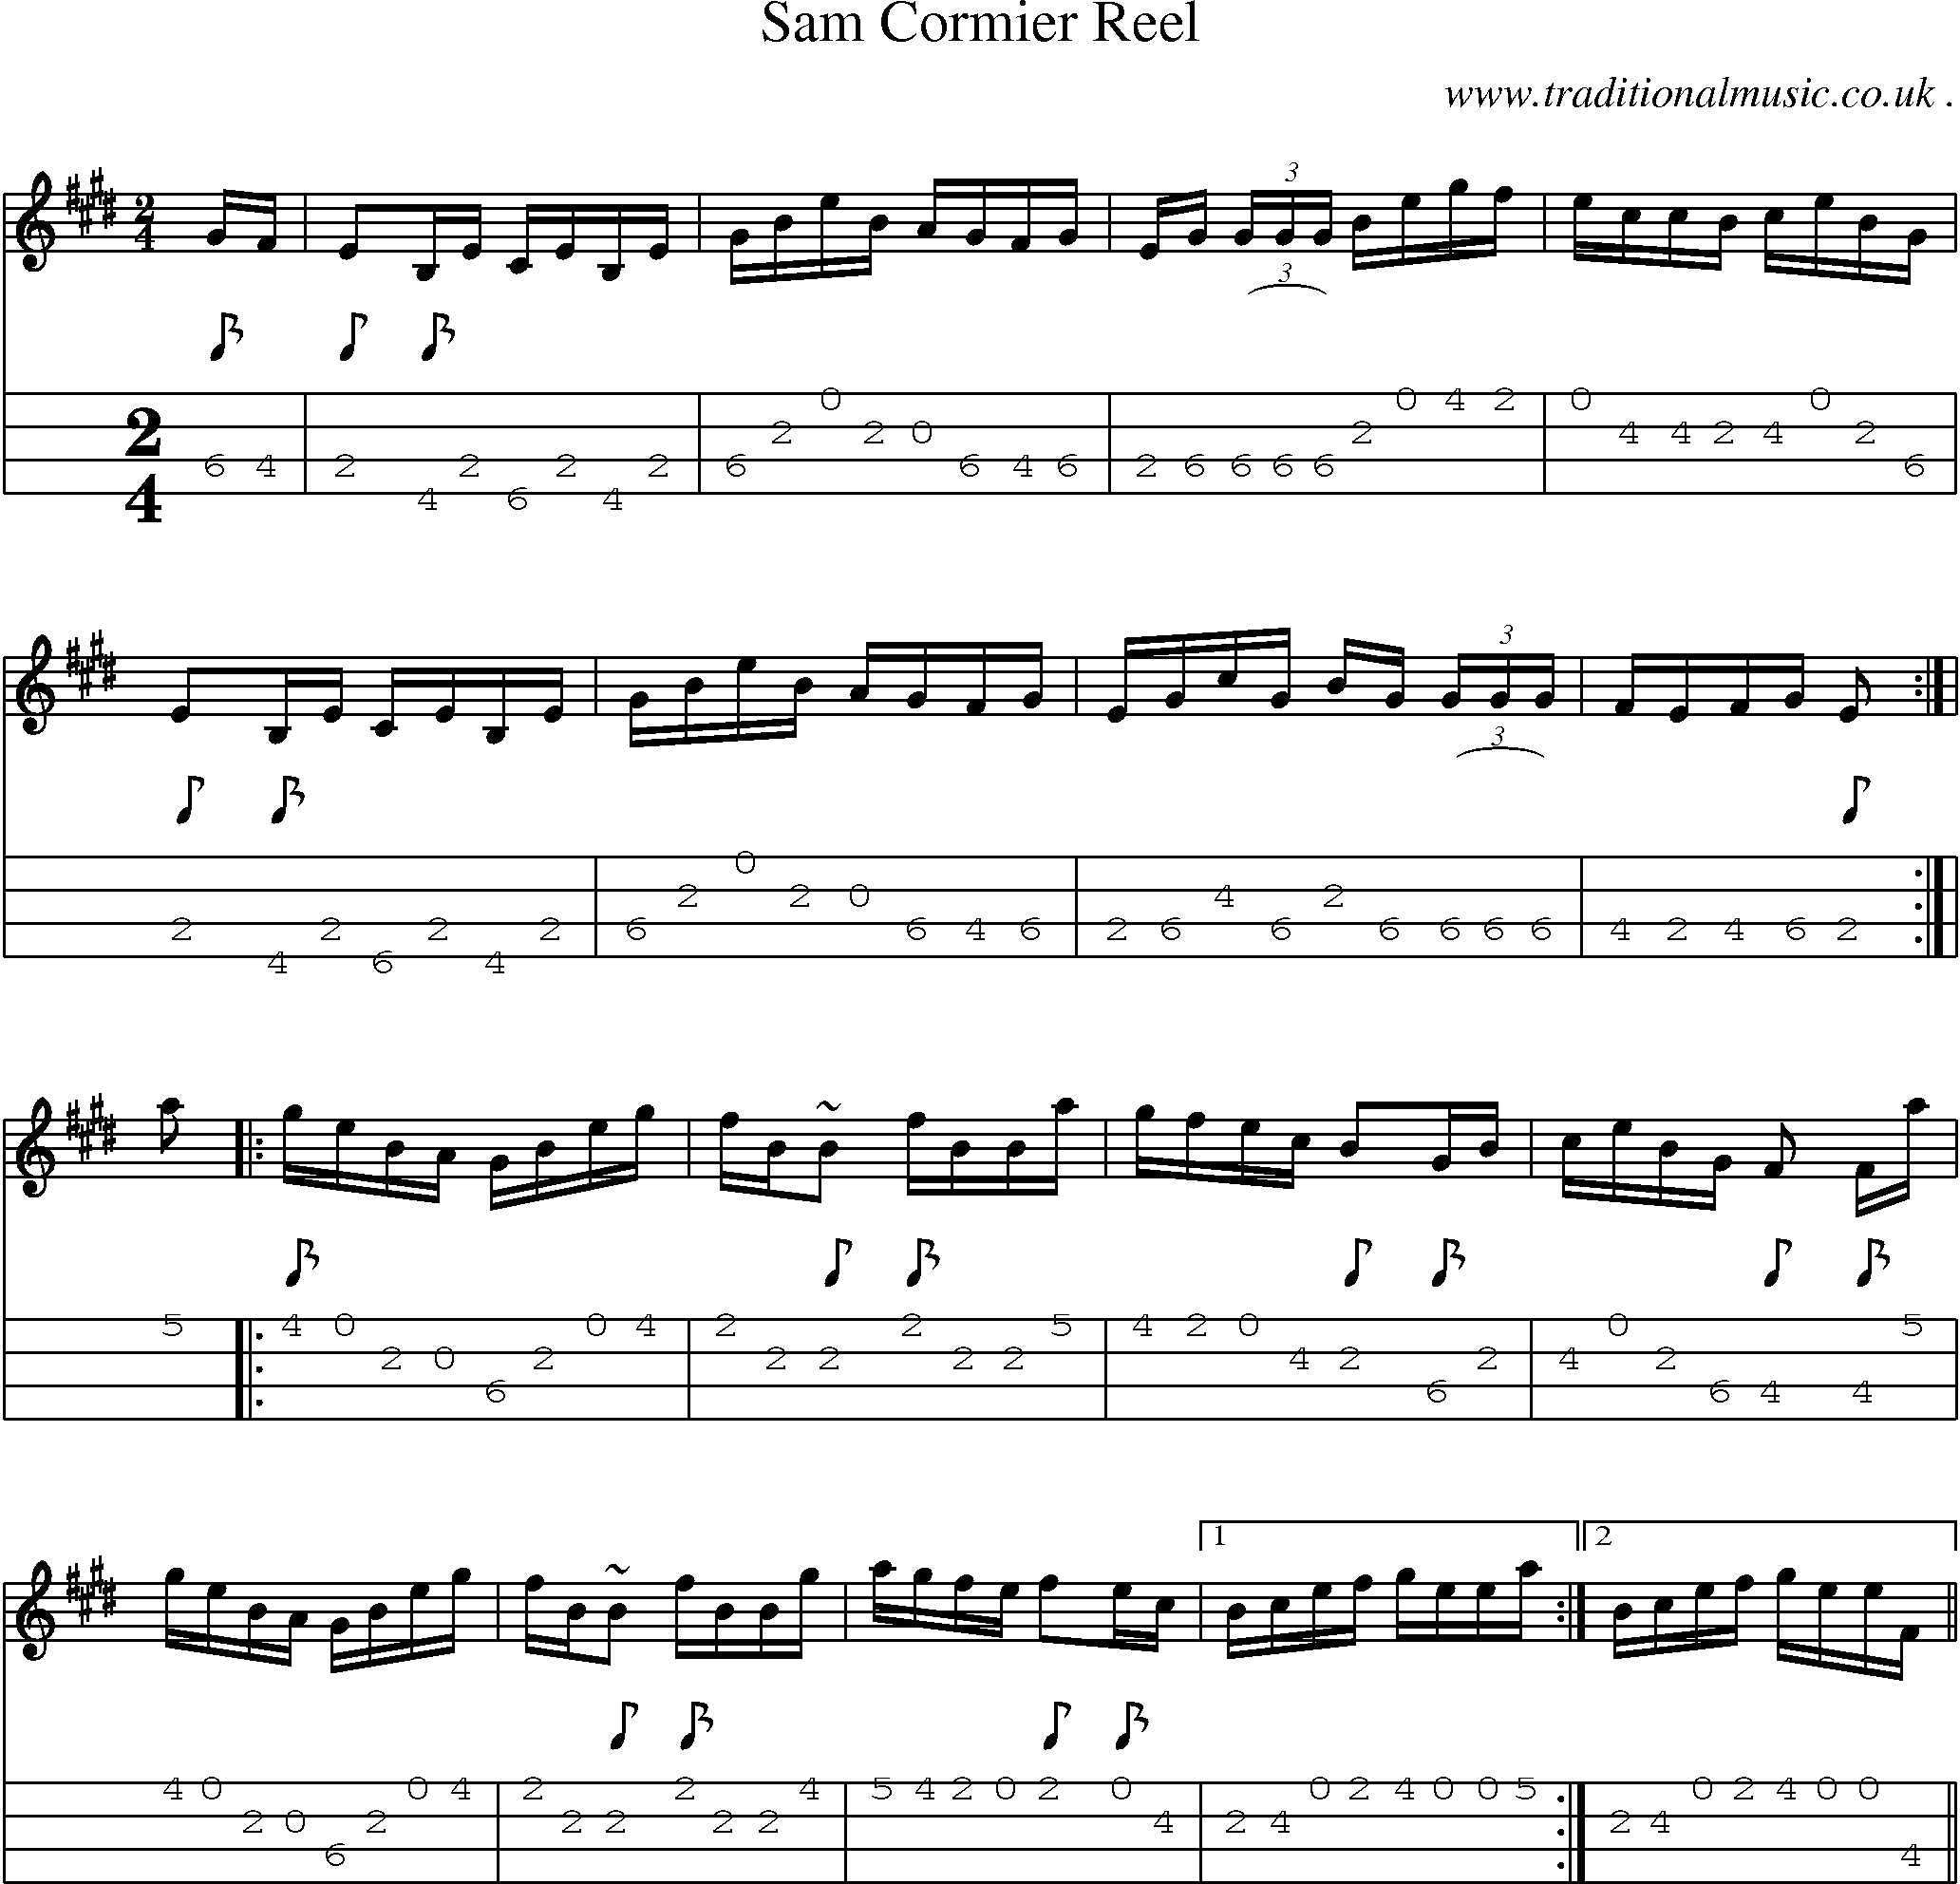 Music Score and Guitar Tabs for Sam Cormier Reel